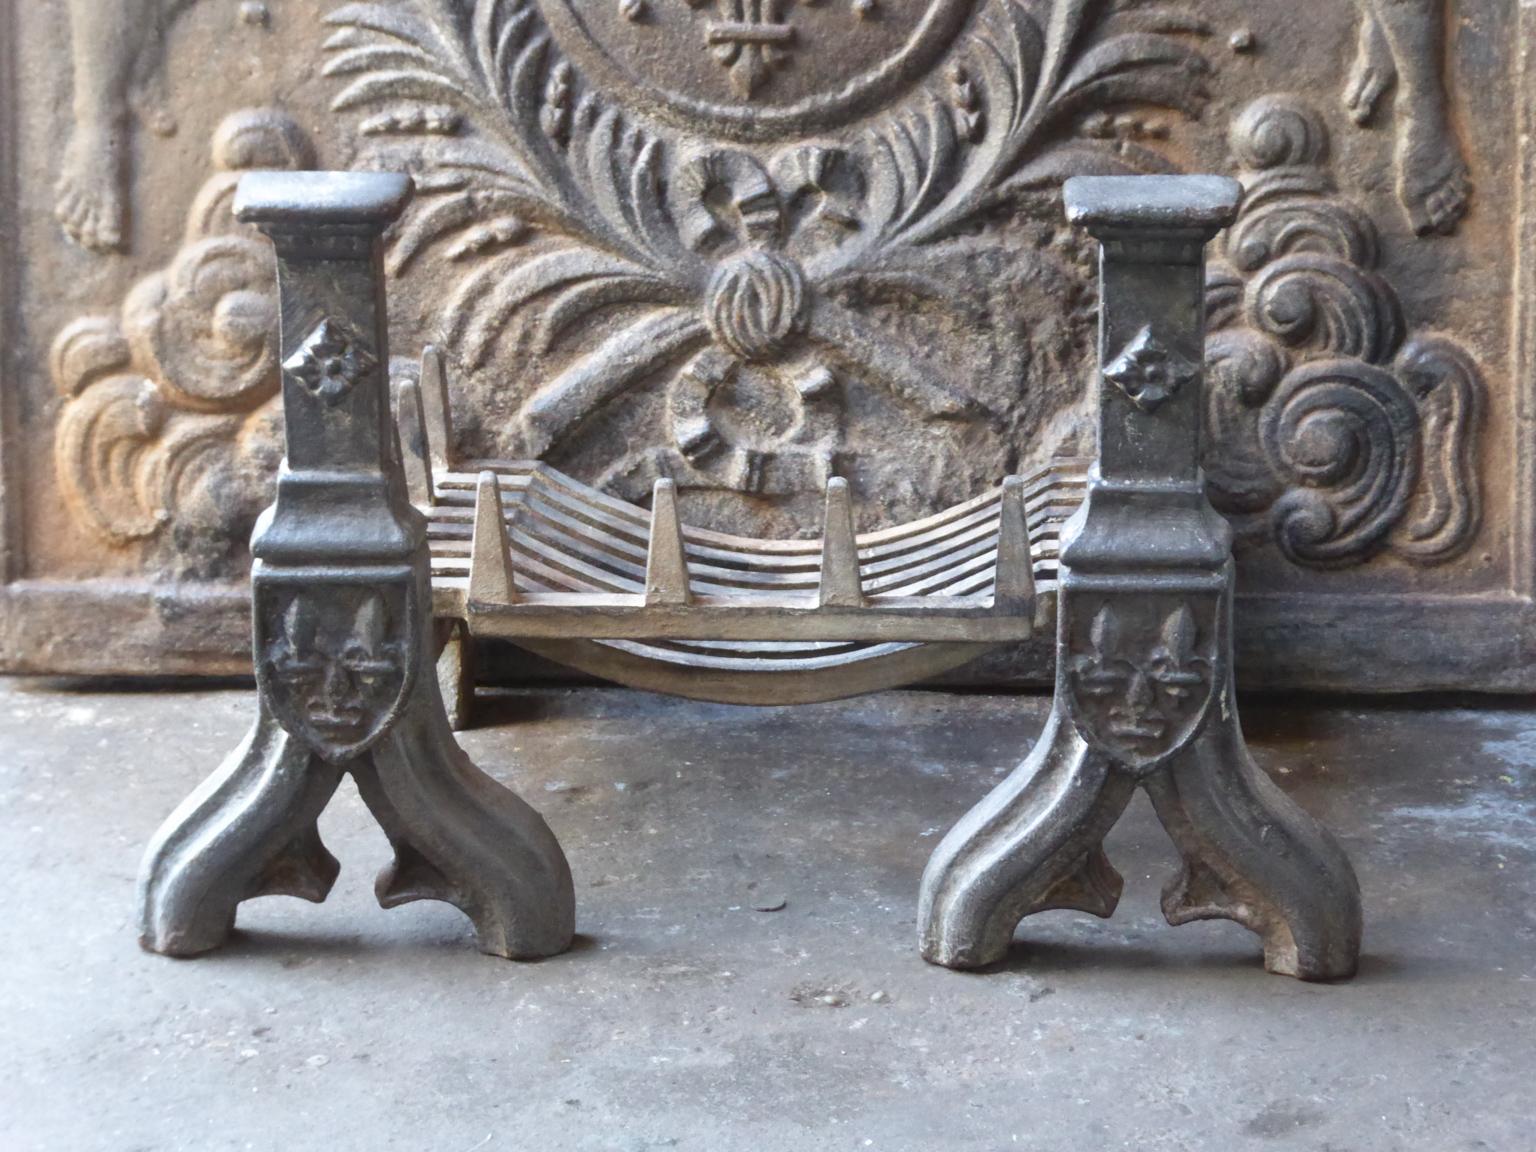 English neo gothic fireplace style basket or fire basket. The fireplace grate is made of cast iron. The total width of the front of the fireplace grate is 27 inch (69 cm).

















 